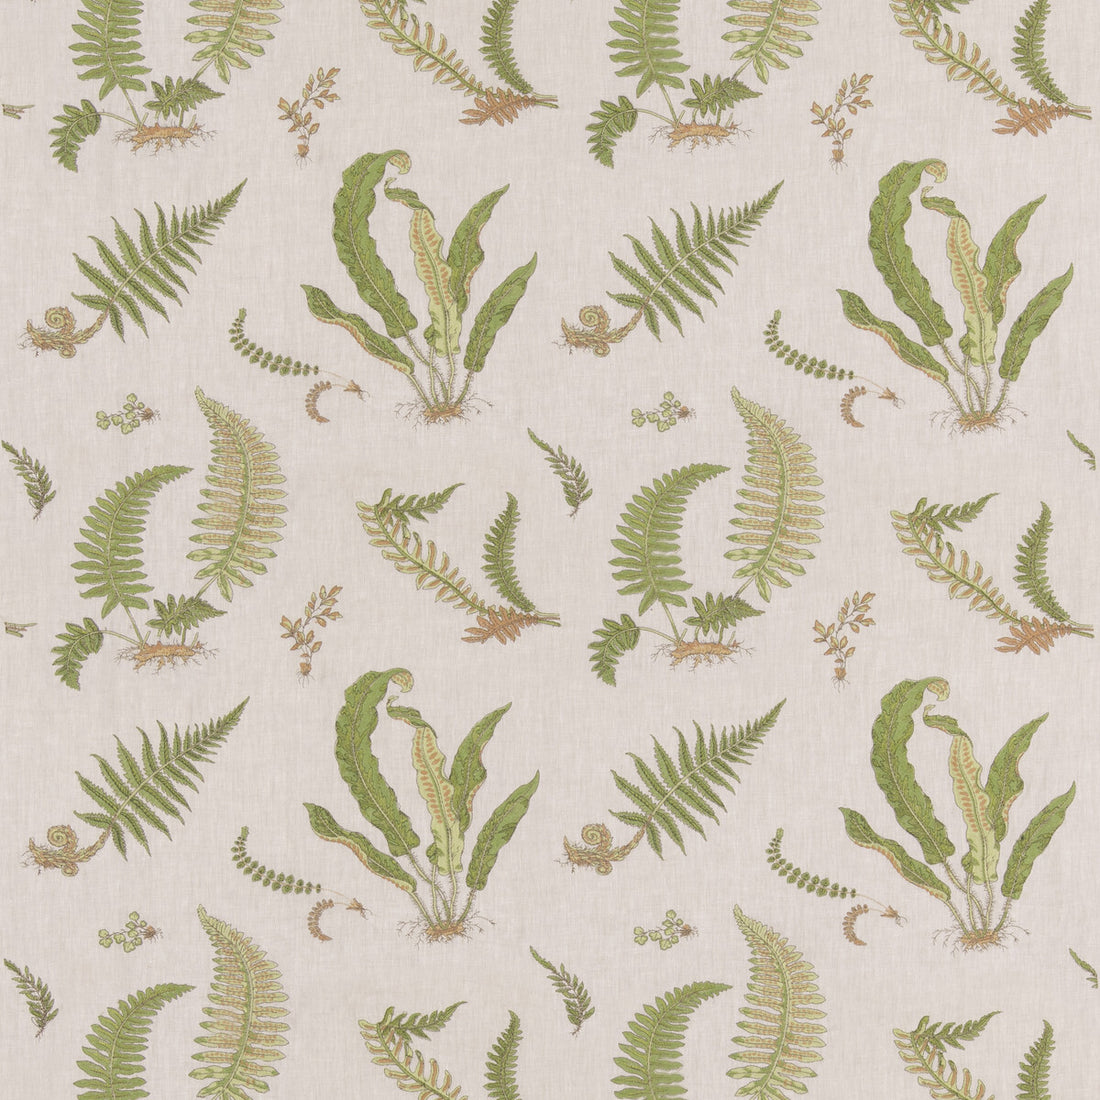 Ferns Embroidery fabric in green/natural color - pattern BF10991.3.0 - by G P &amp; J Baker in the Burford collection